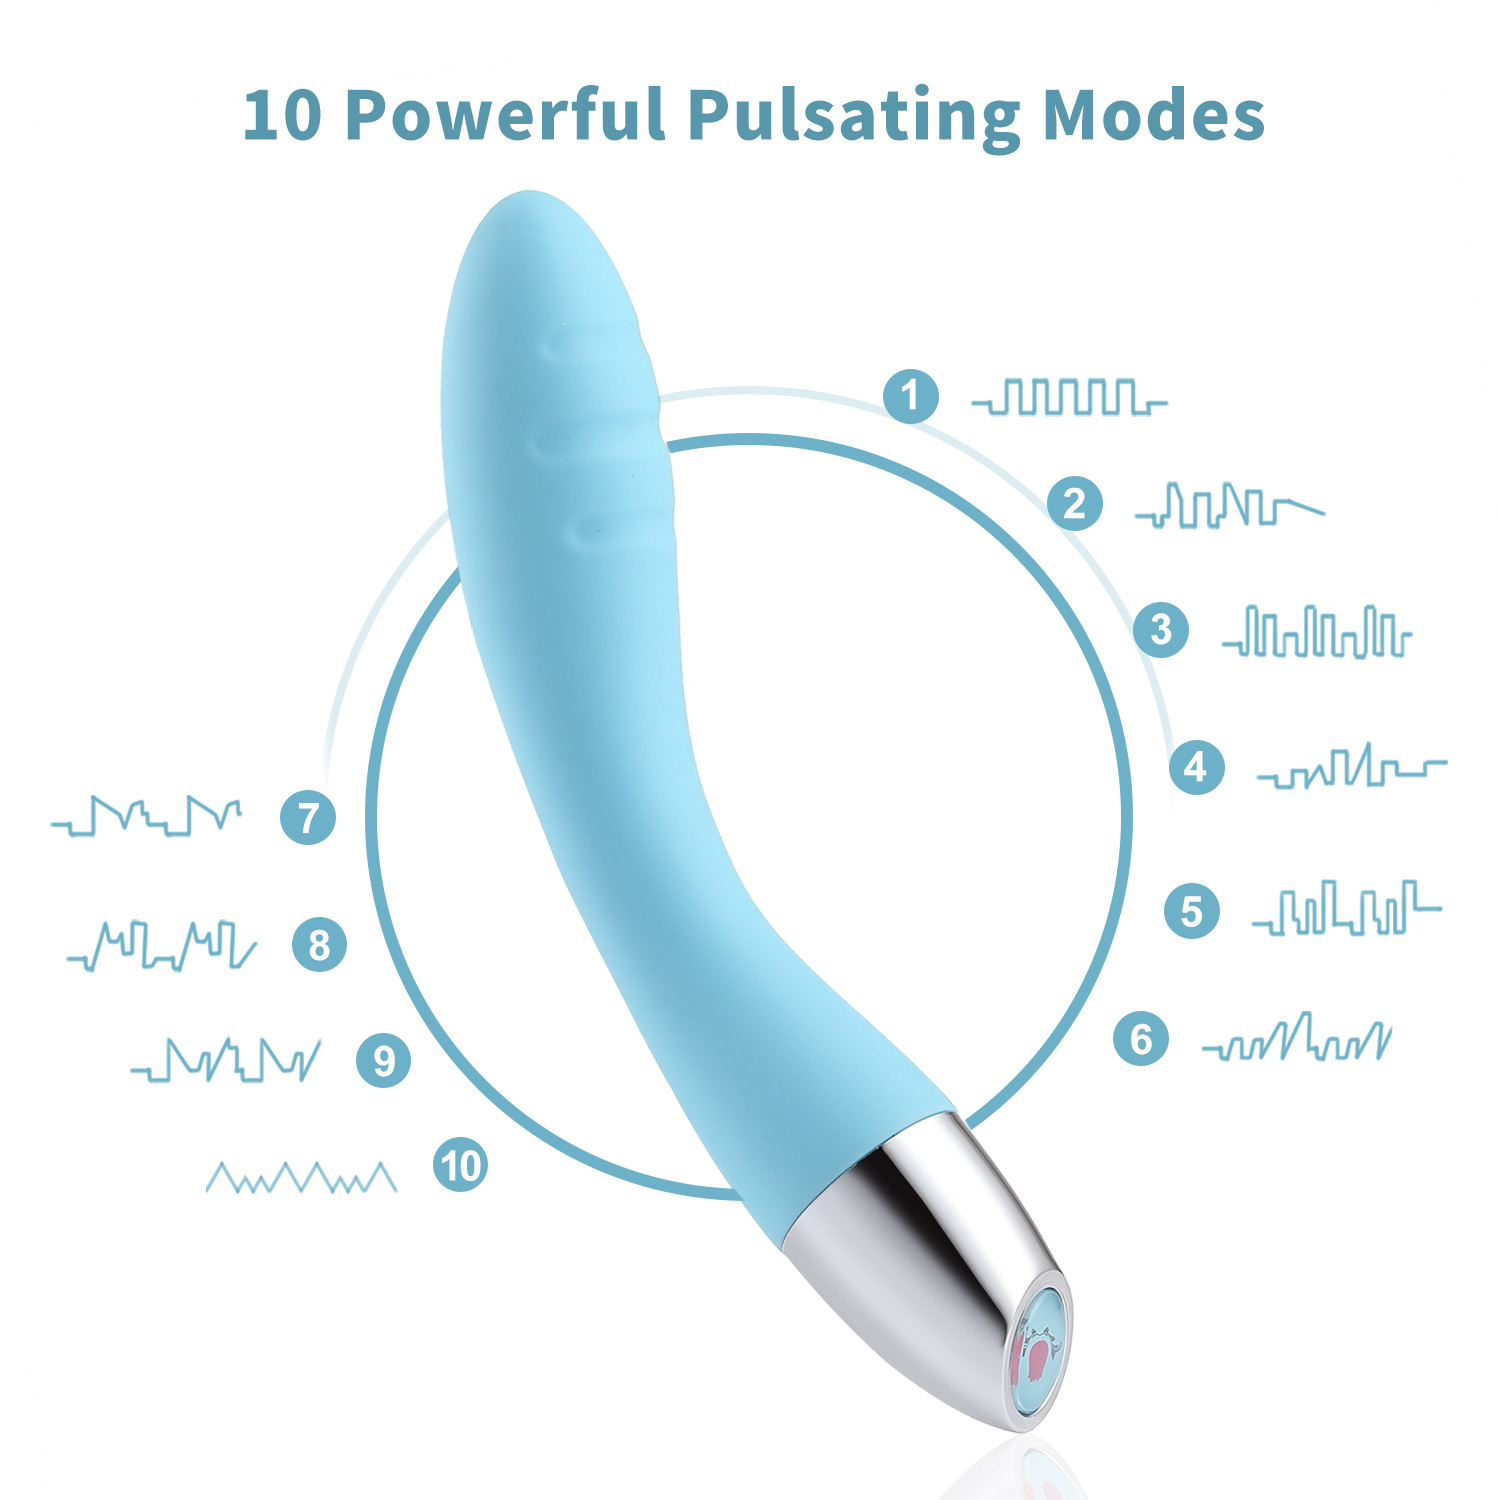 Wowyes Luxeluv V1 Vibrator Pulsating Modes